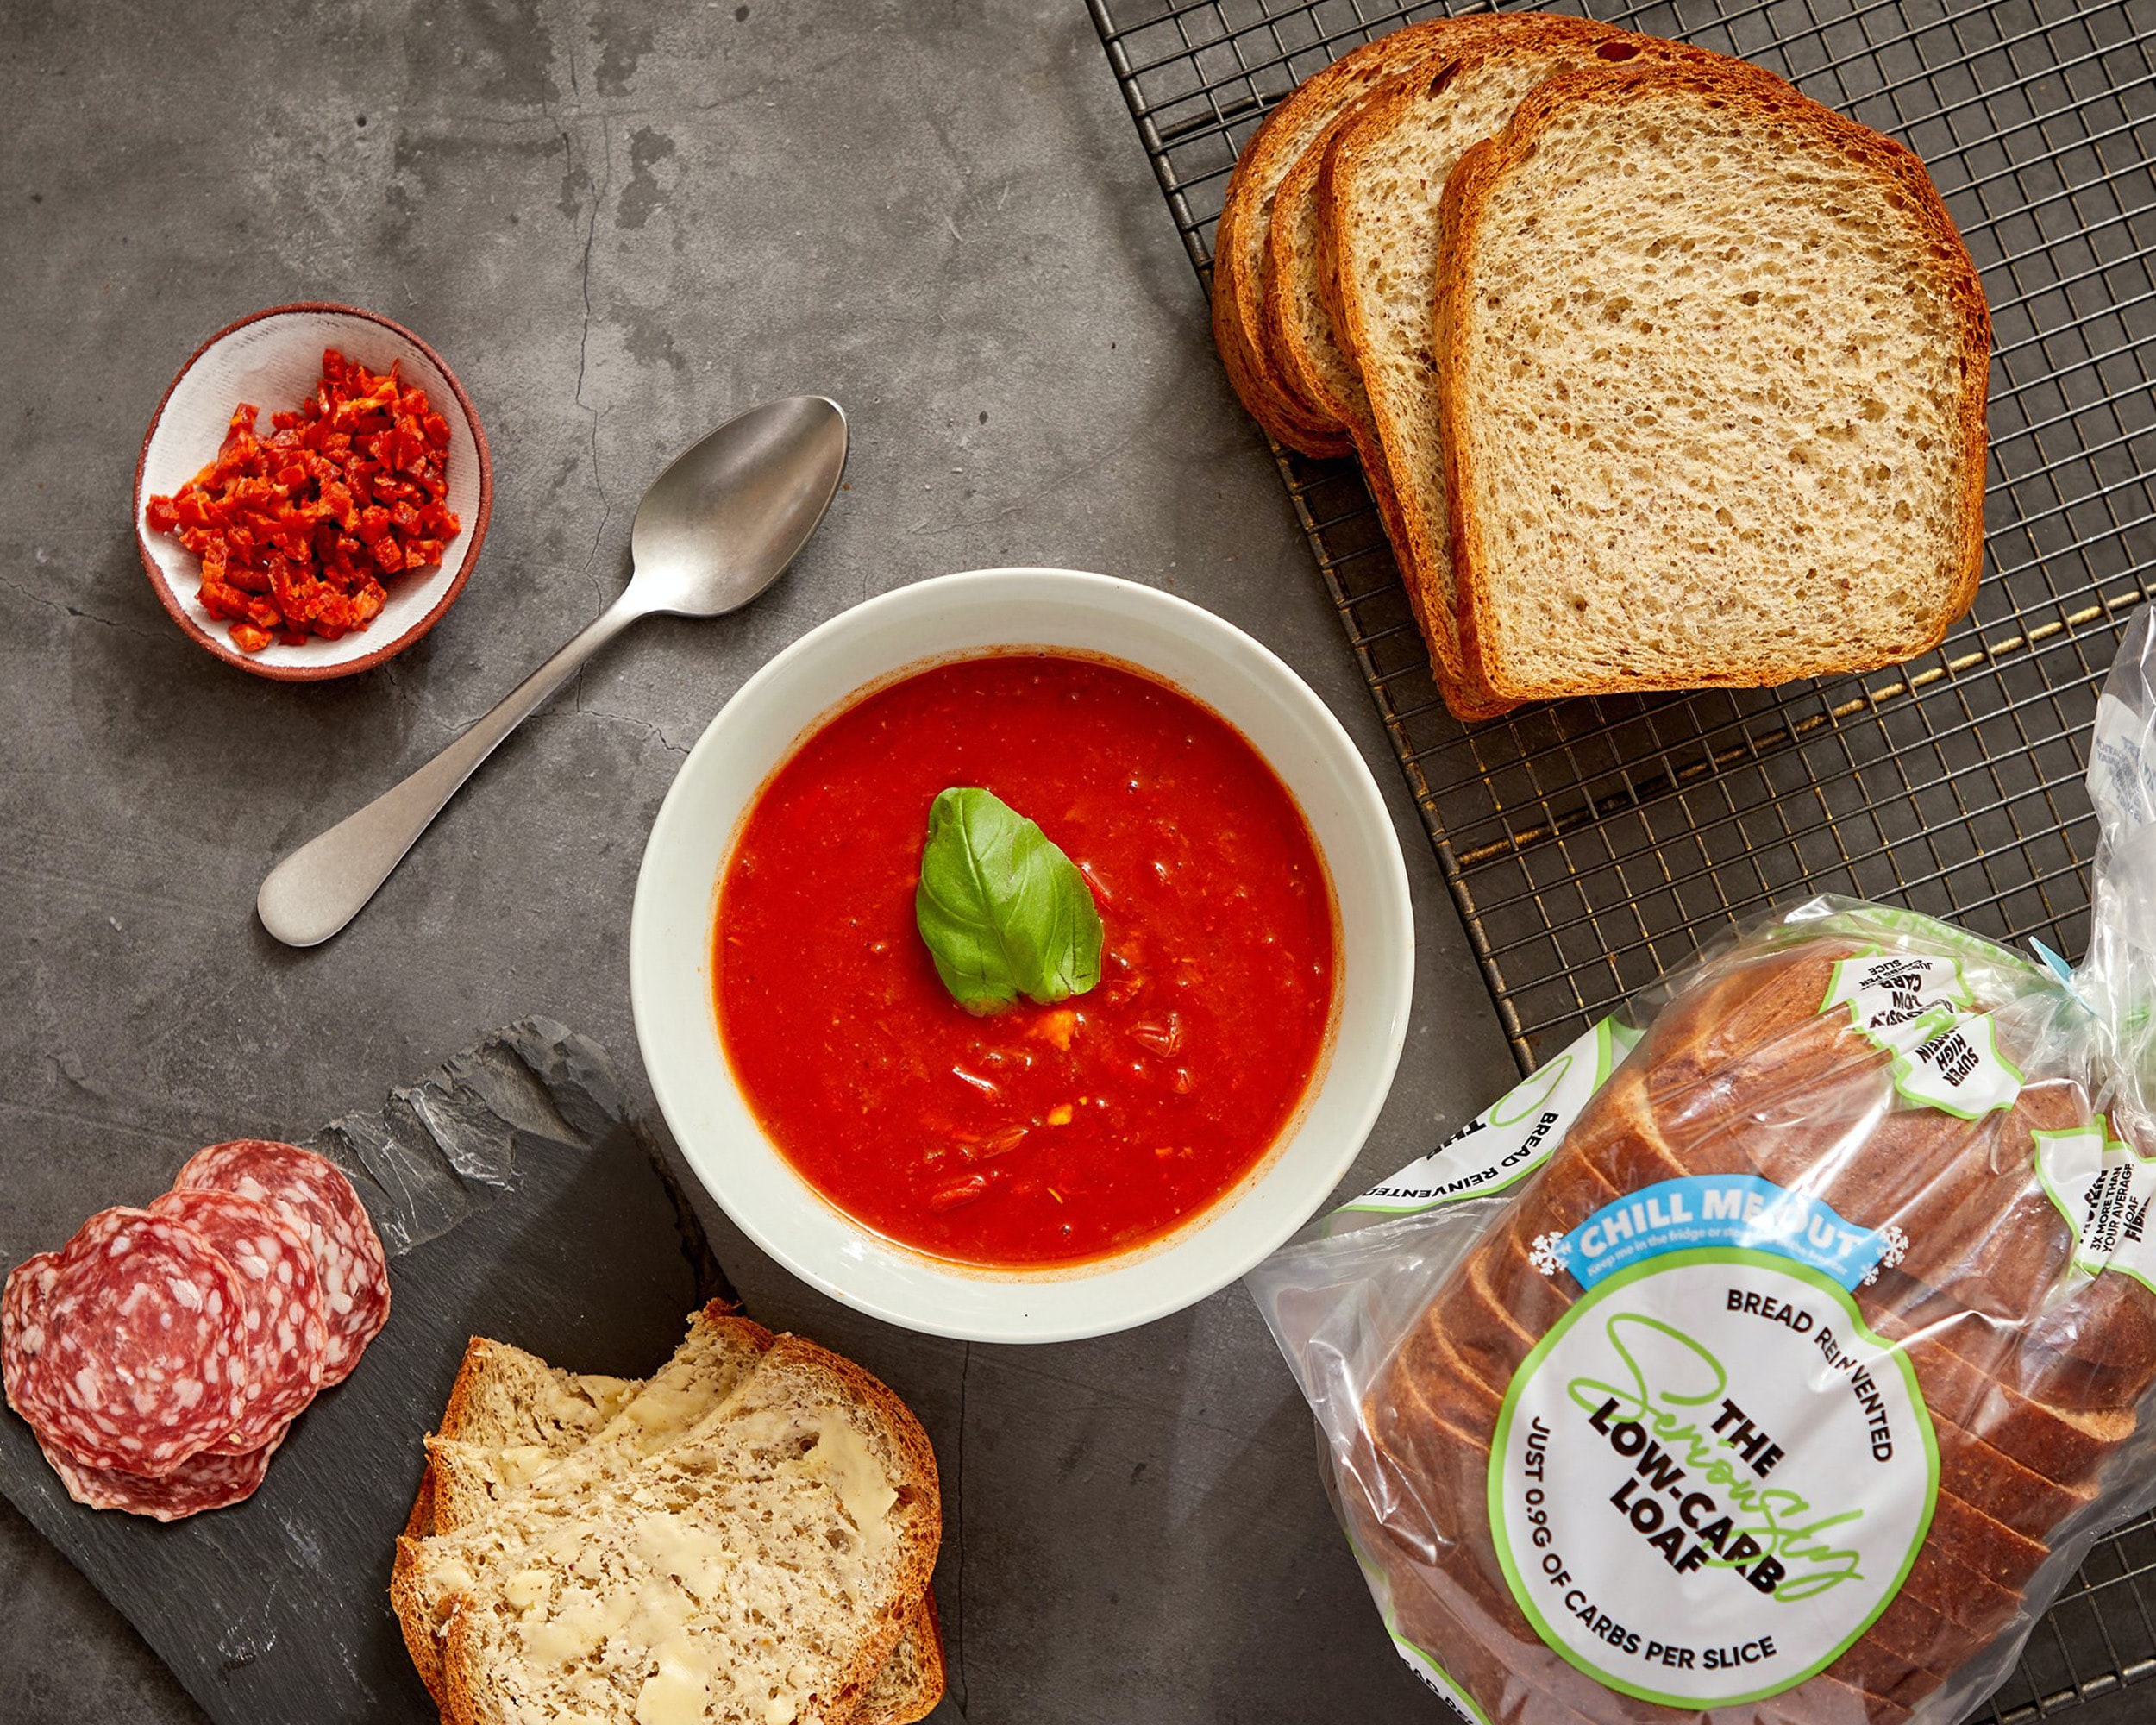 A bowl of tomato soup with slices of low-carb bread